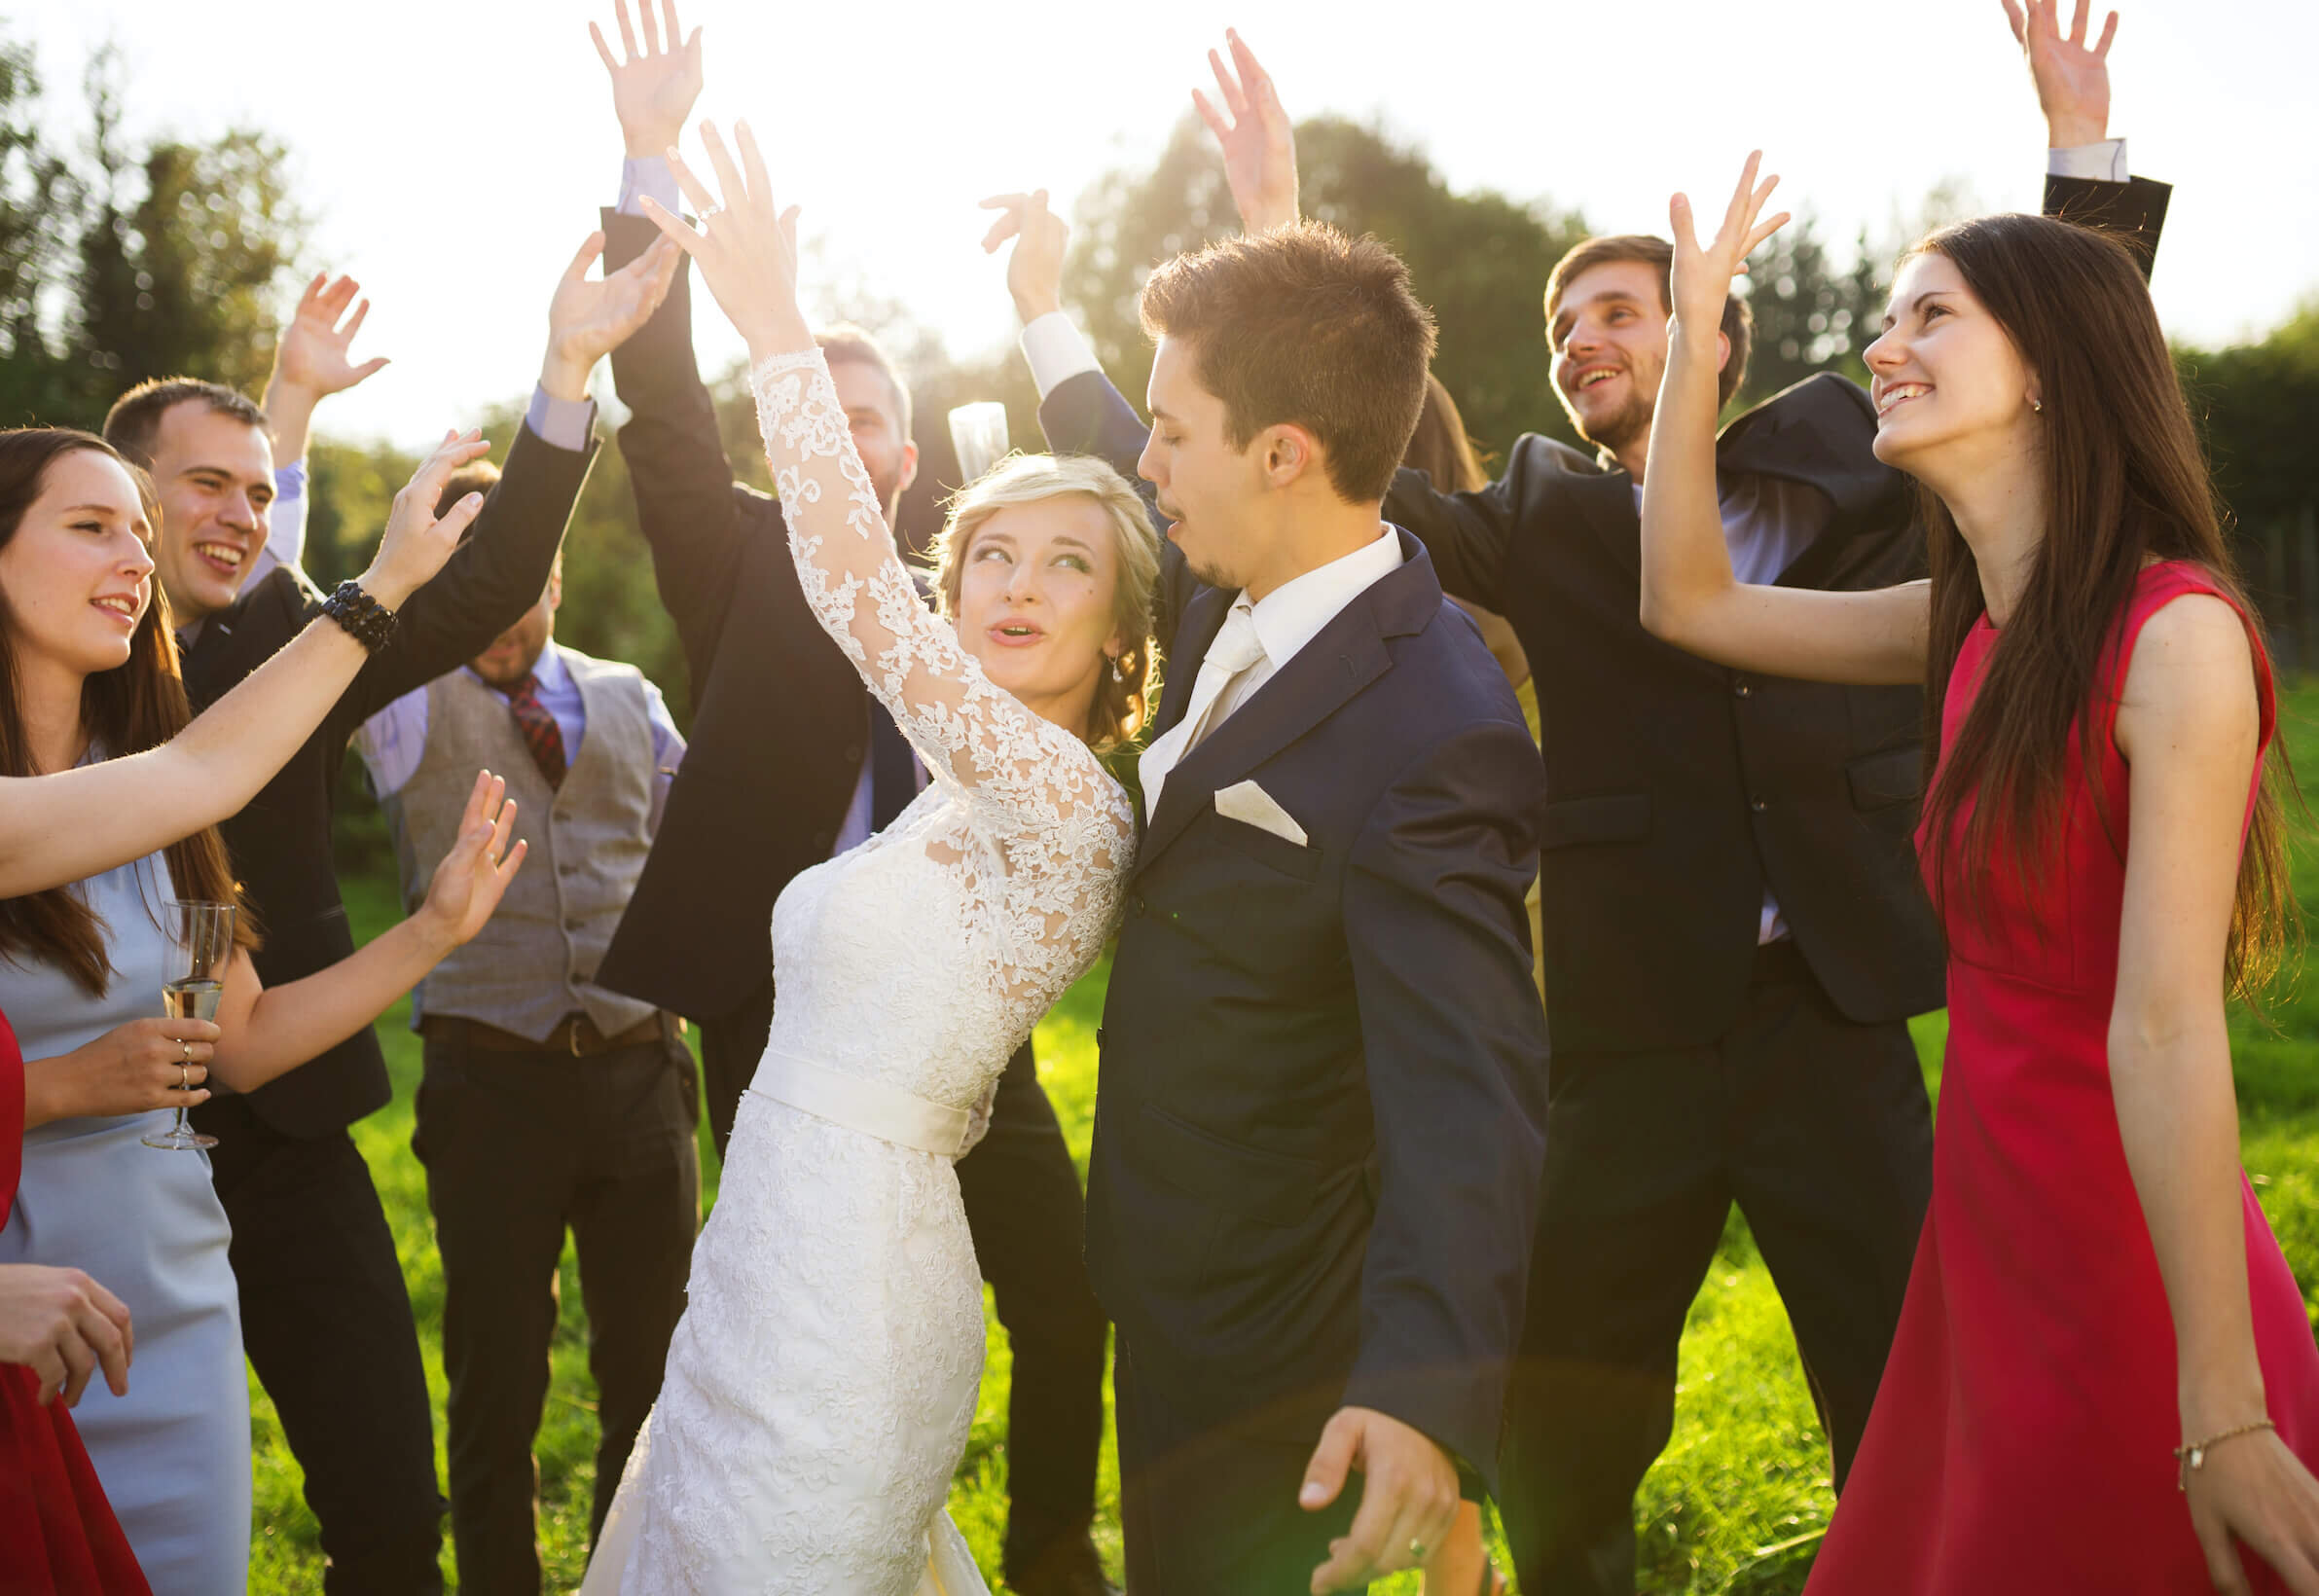 Top 13 Queen Dance Songs For An Amazing Wedding Party - Details